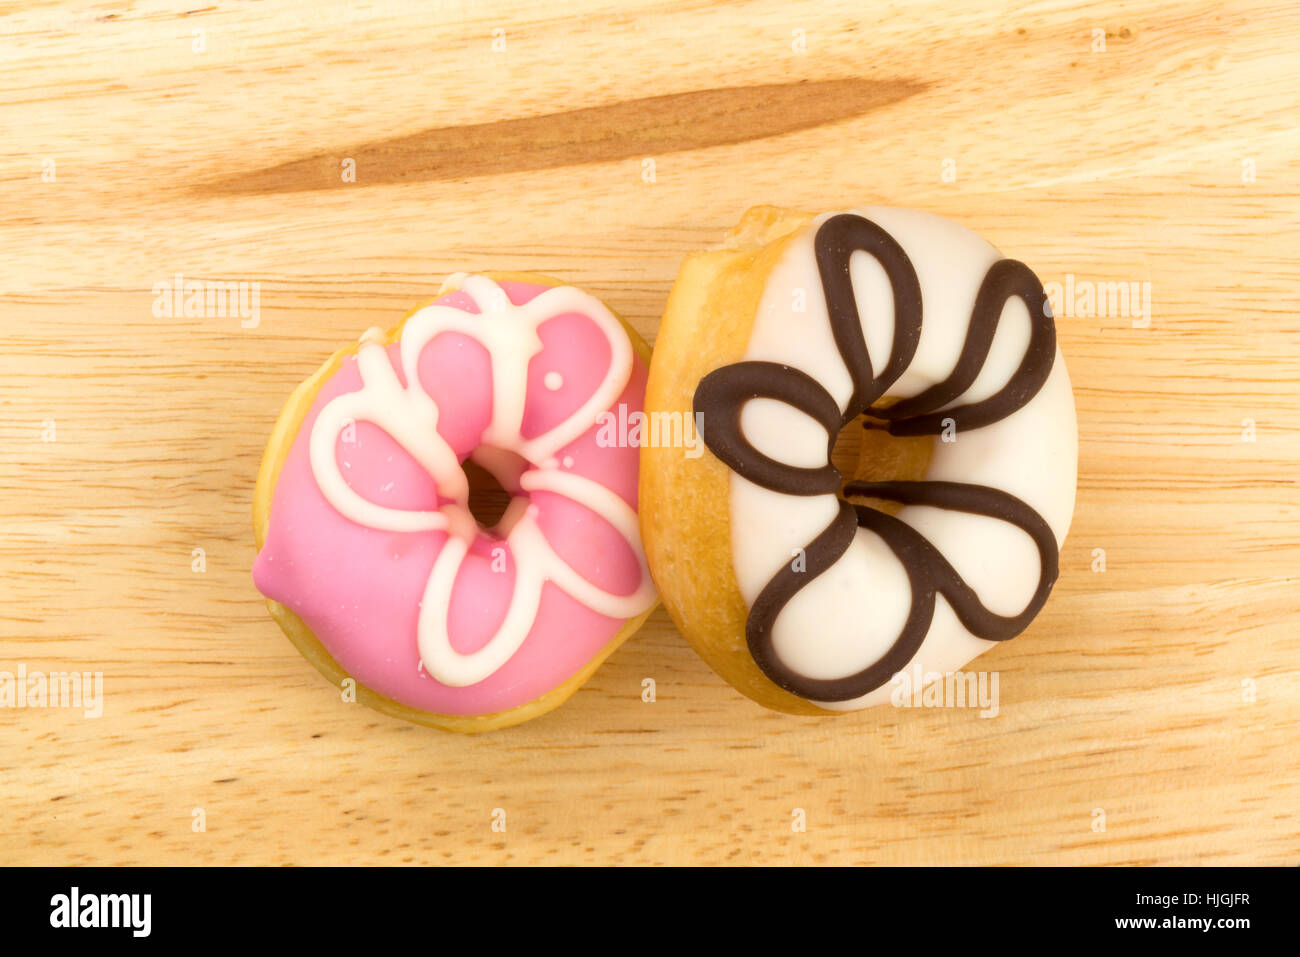 Top view of tasty doughnuts on a wooden board Stock Photo